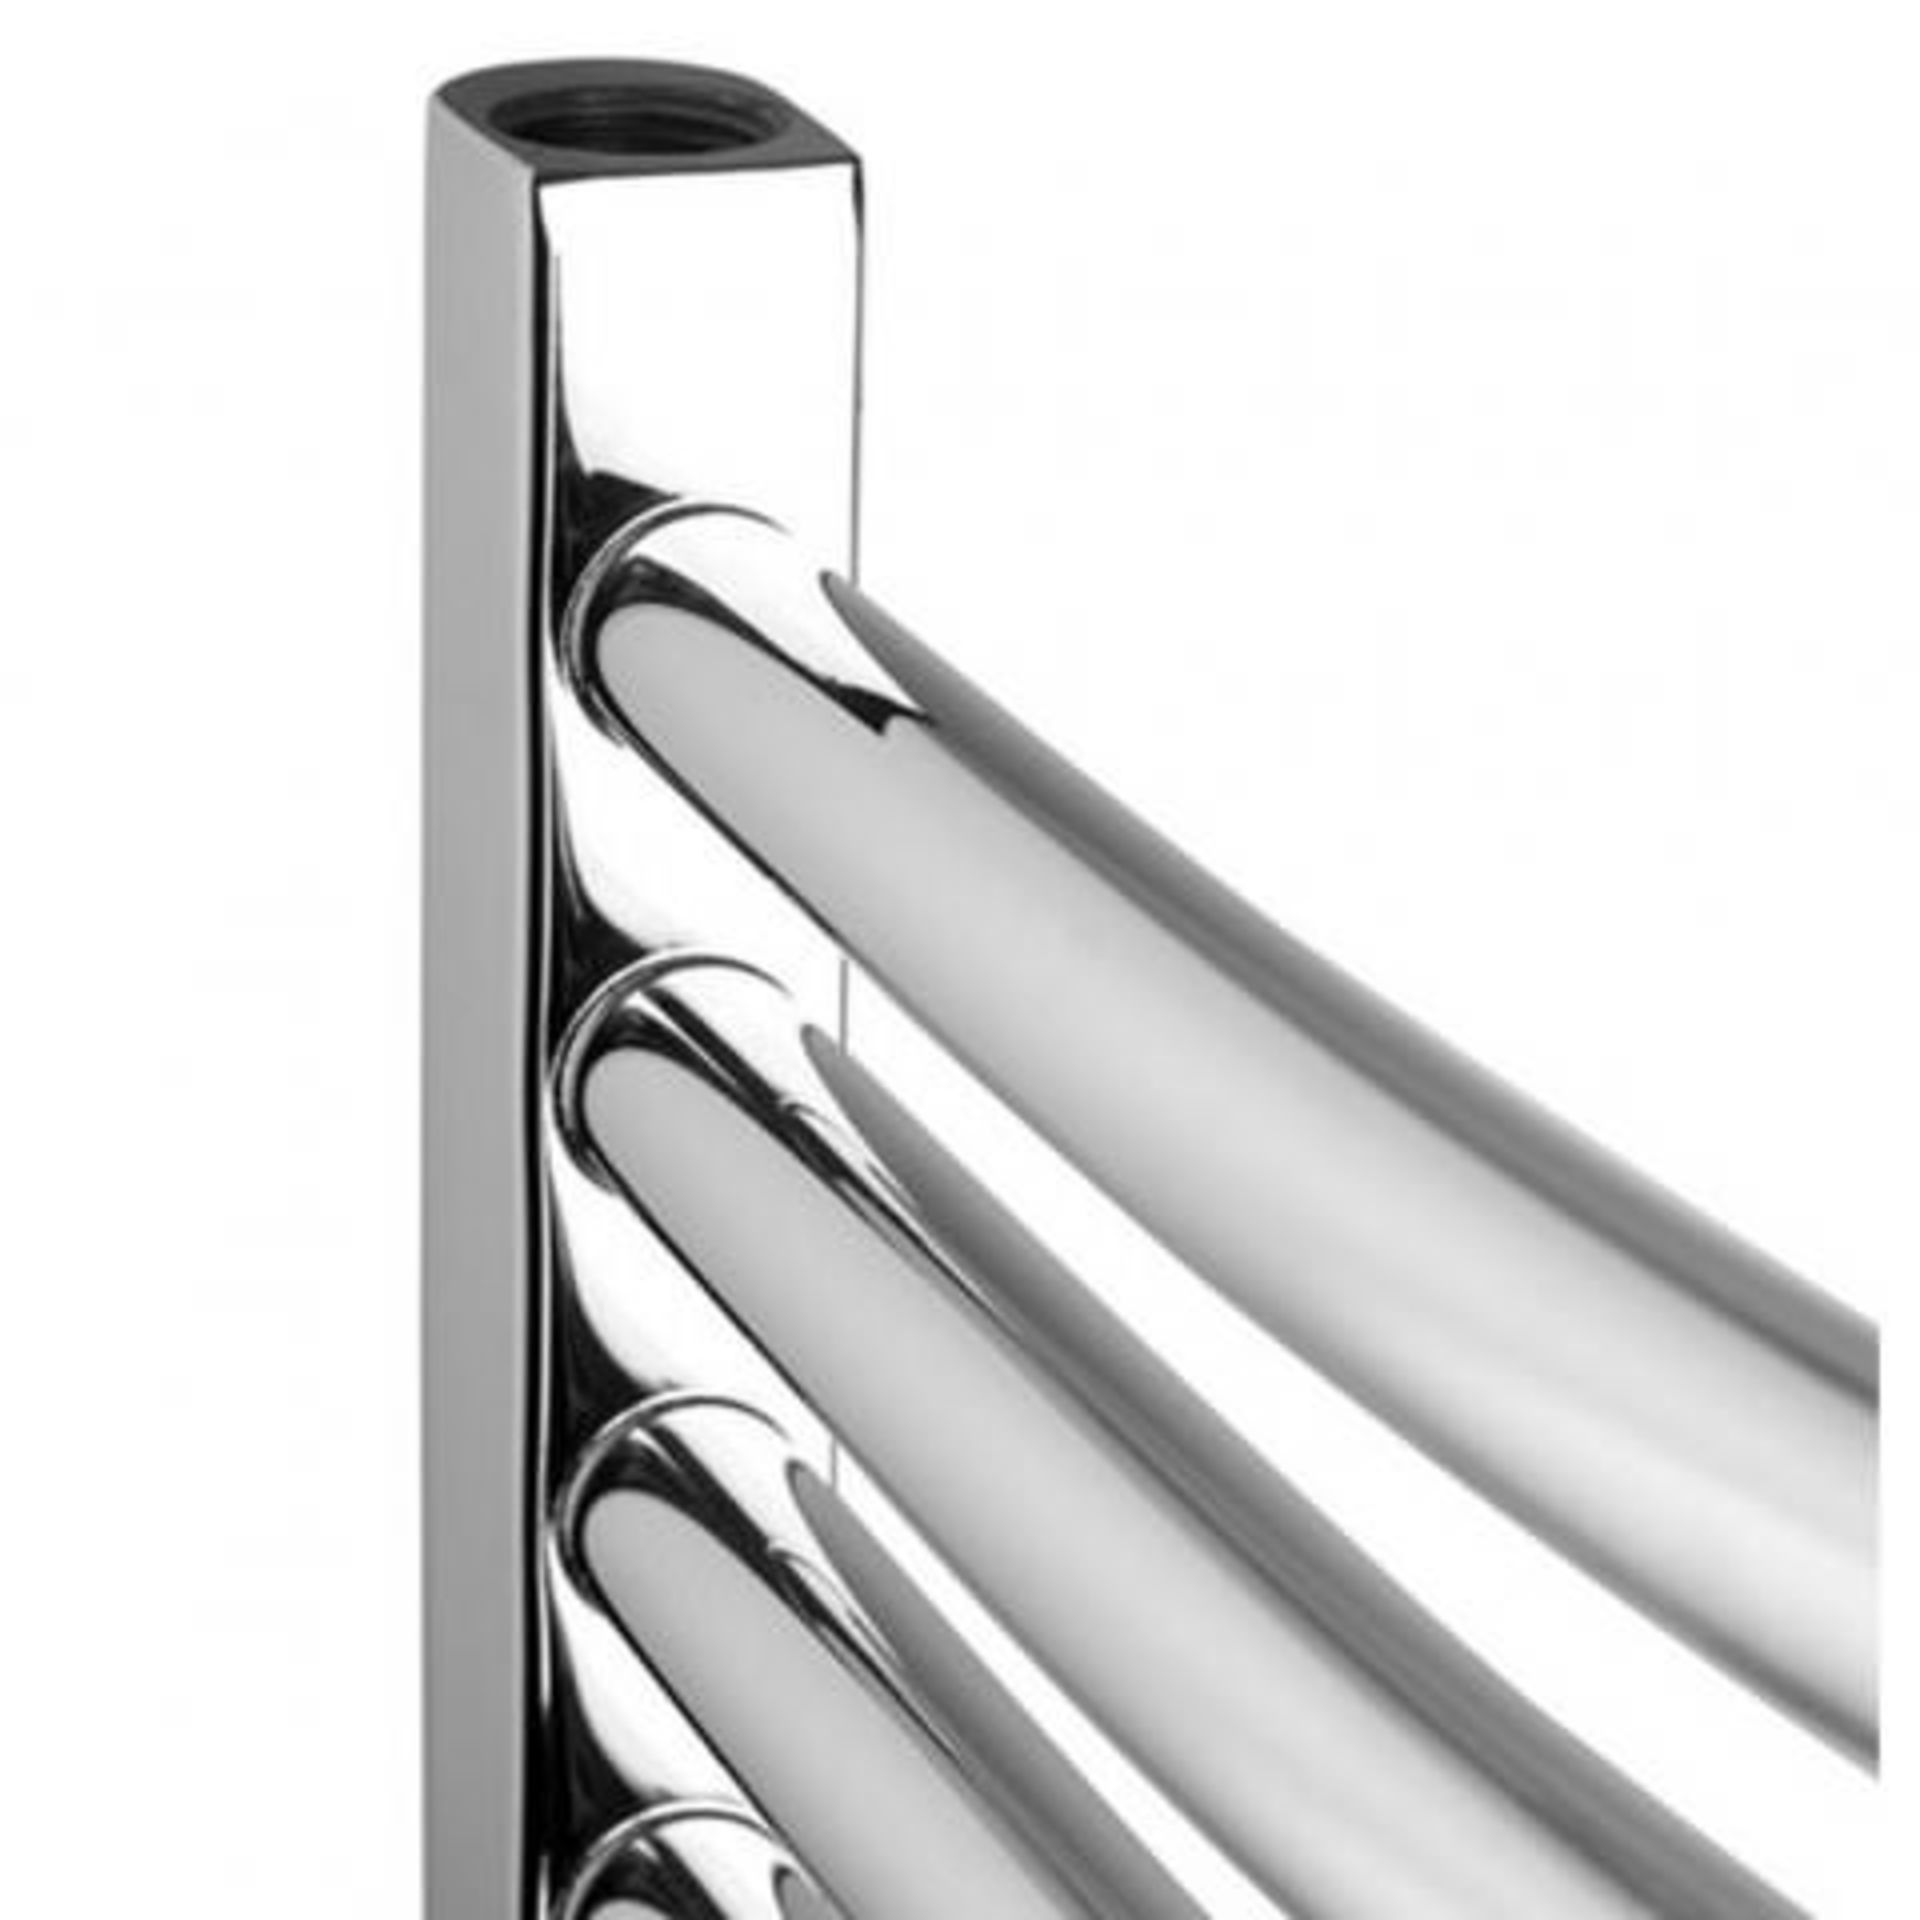 6 BRAND NEW BOXED 1200x600mm - 20mm Tubes - RRP £219.99.Chrome Curved Rail Ladder Towel Radiator. - Image 3 of 3